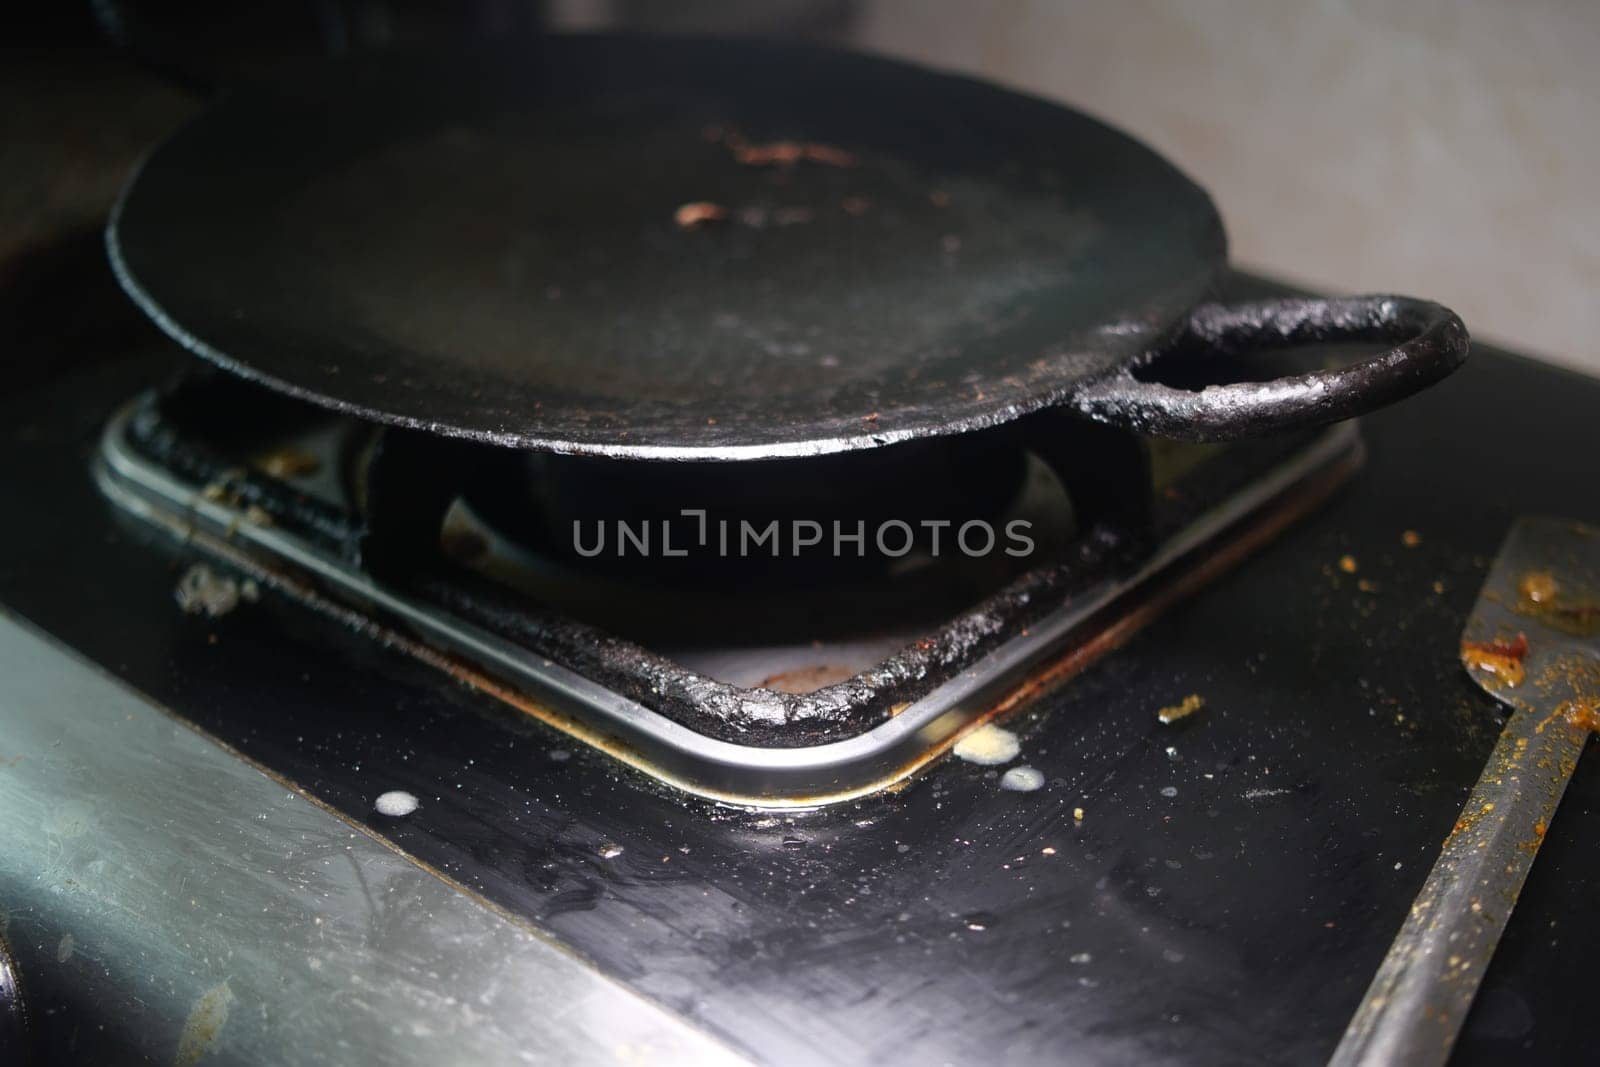 dirty and messy LPG gas stove by towfiq007